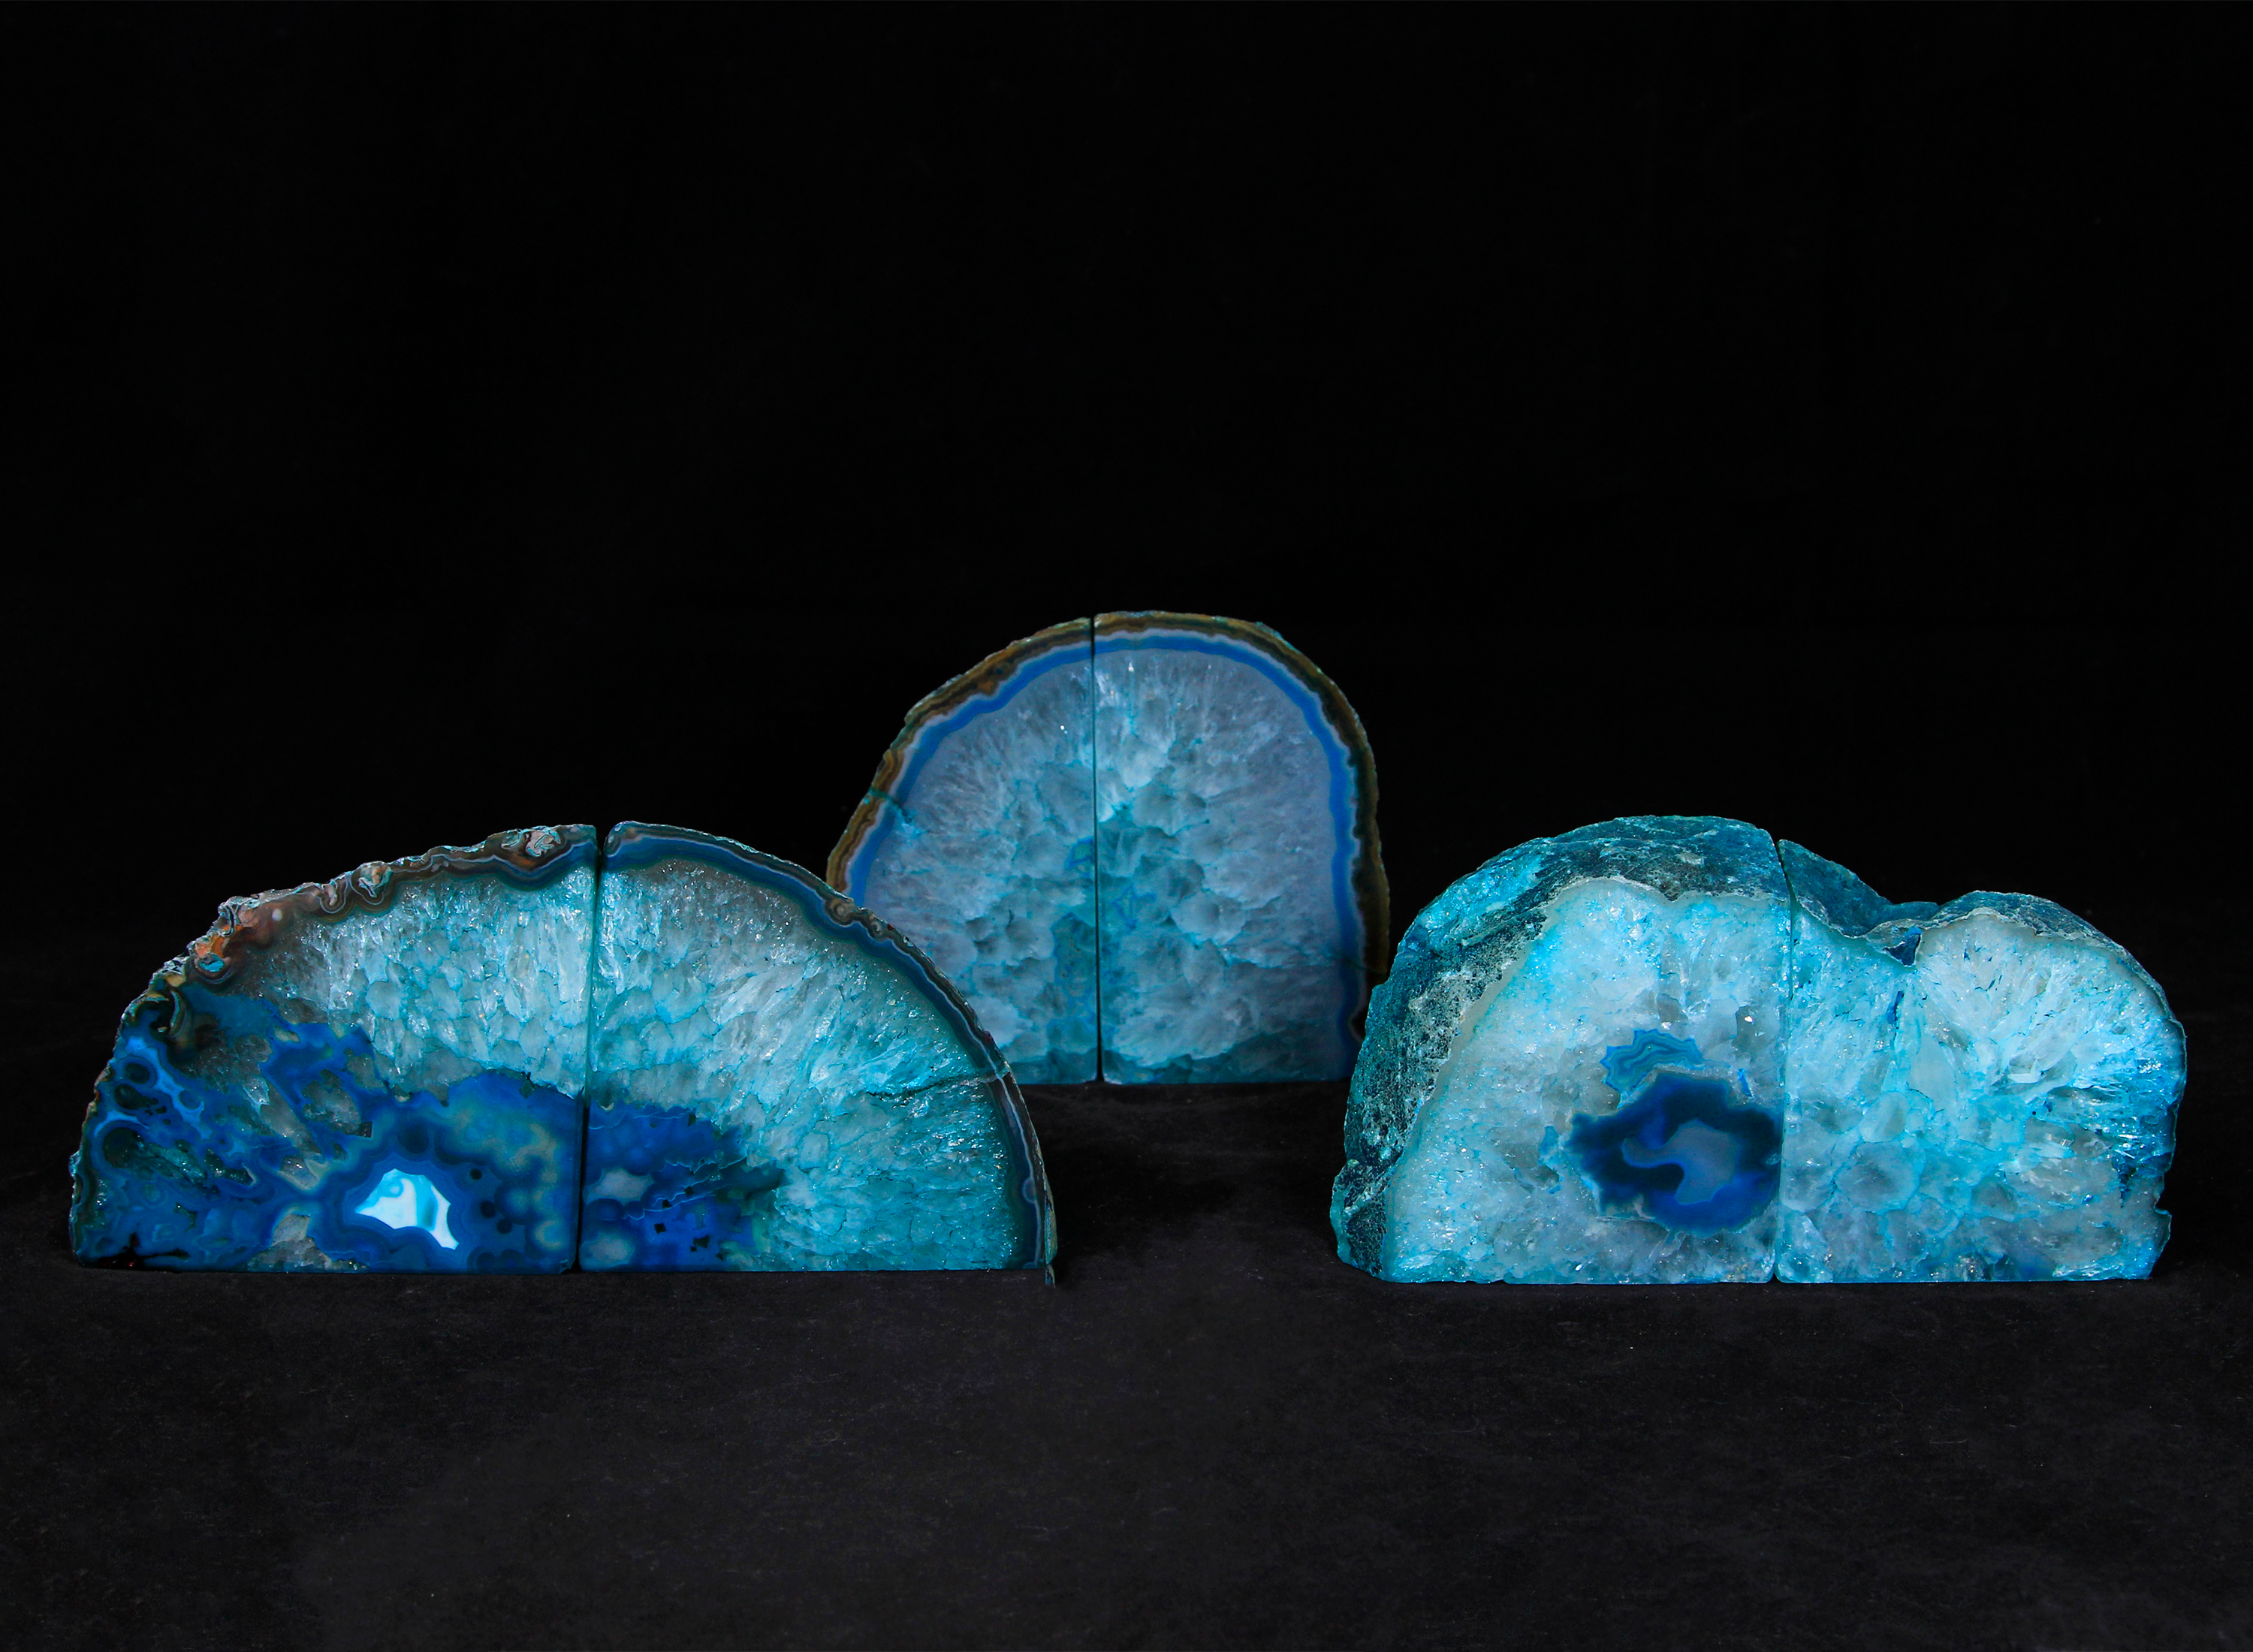 Three pairs of matching small teal Agate bookends